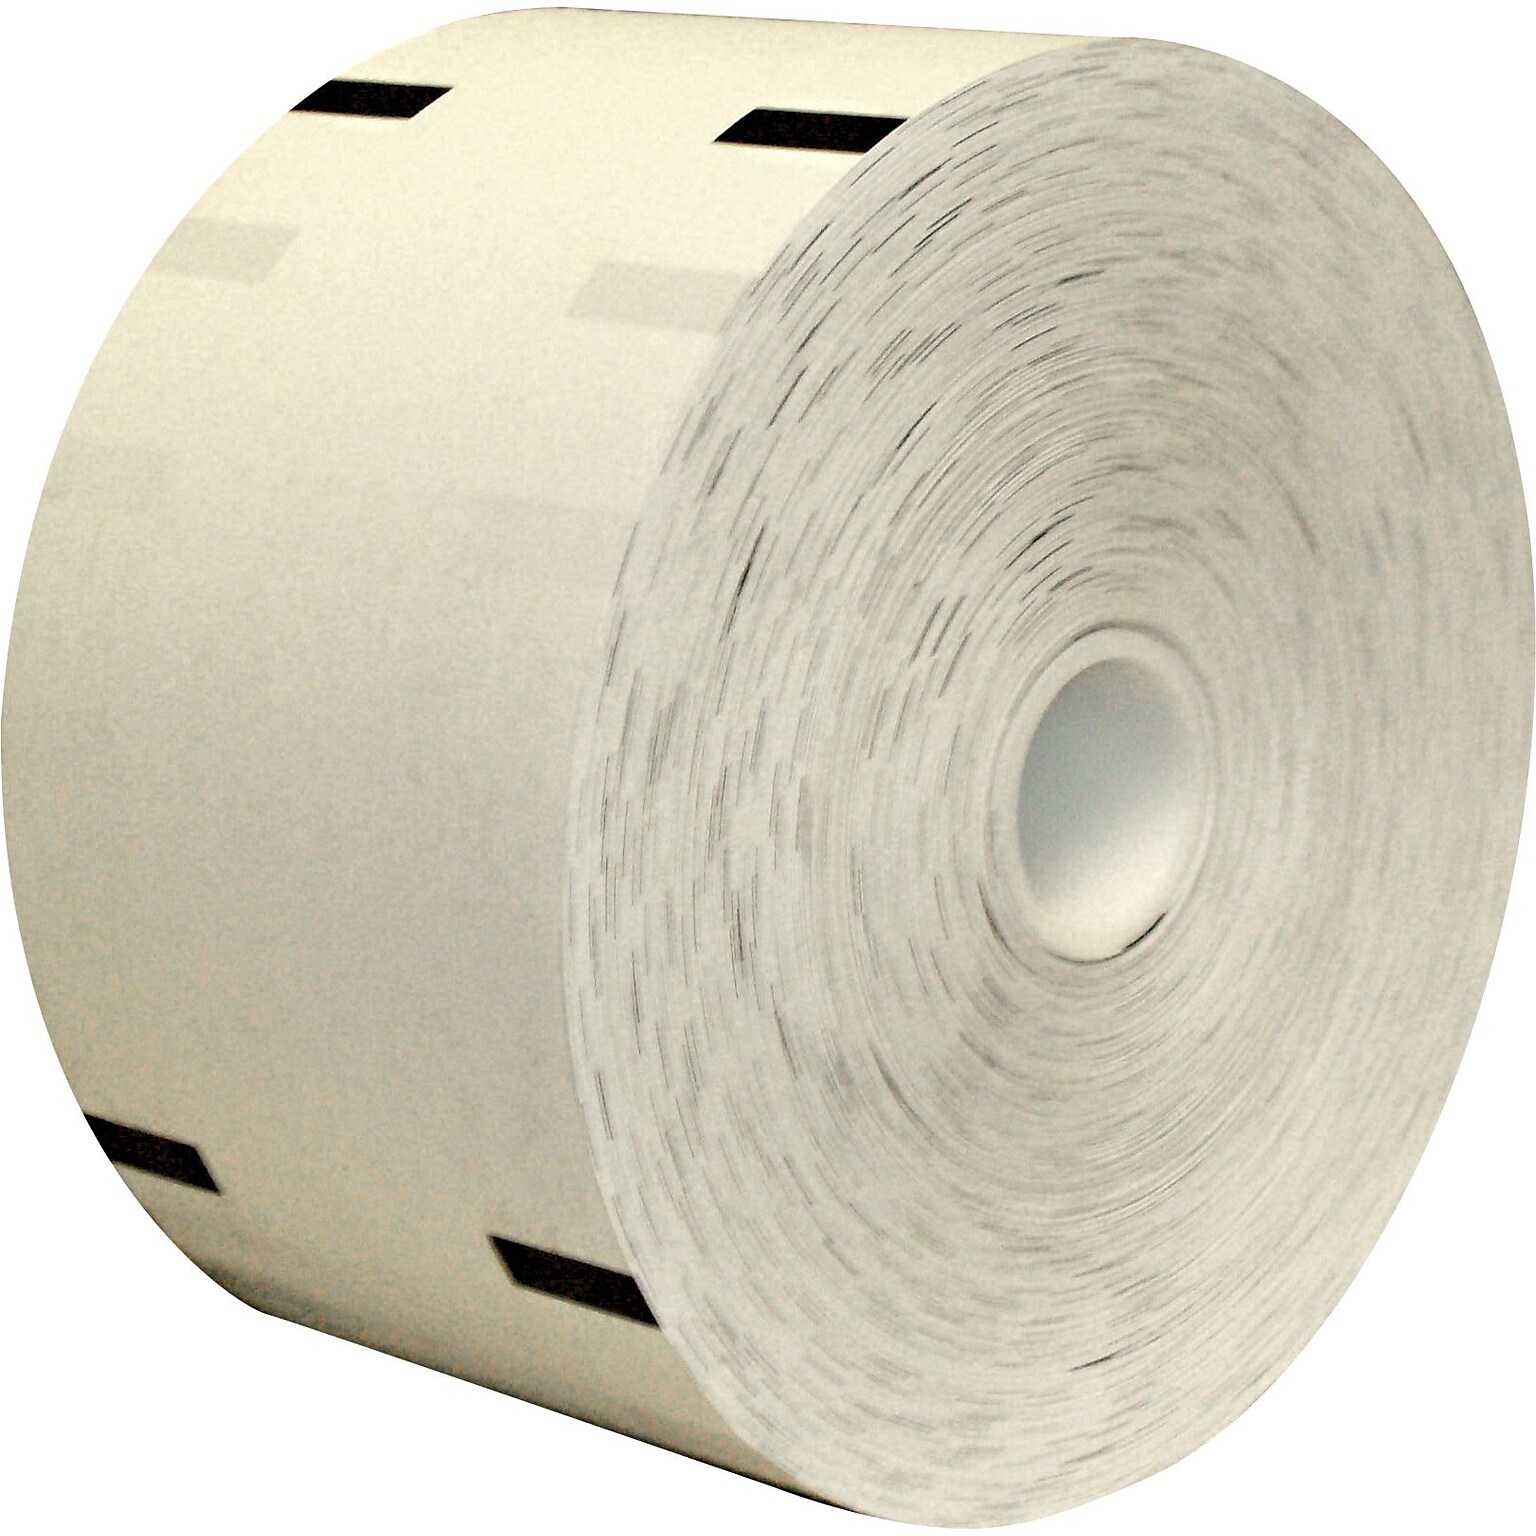 Control Papers Thermal ATM Paper Rolls, 3 1/8 x 83.33, 4 Rolls/Pack (575293)